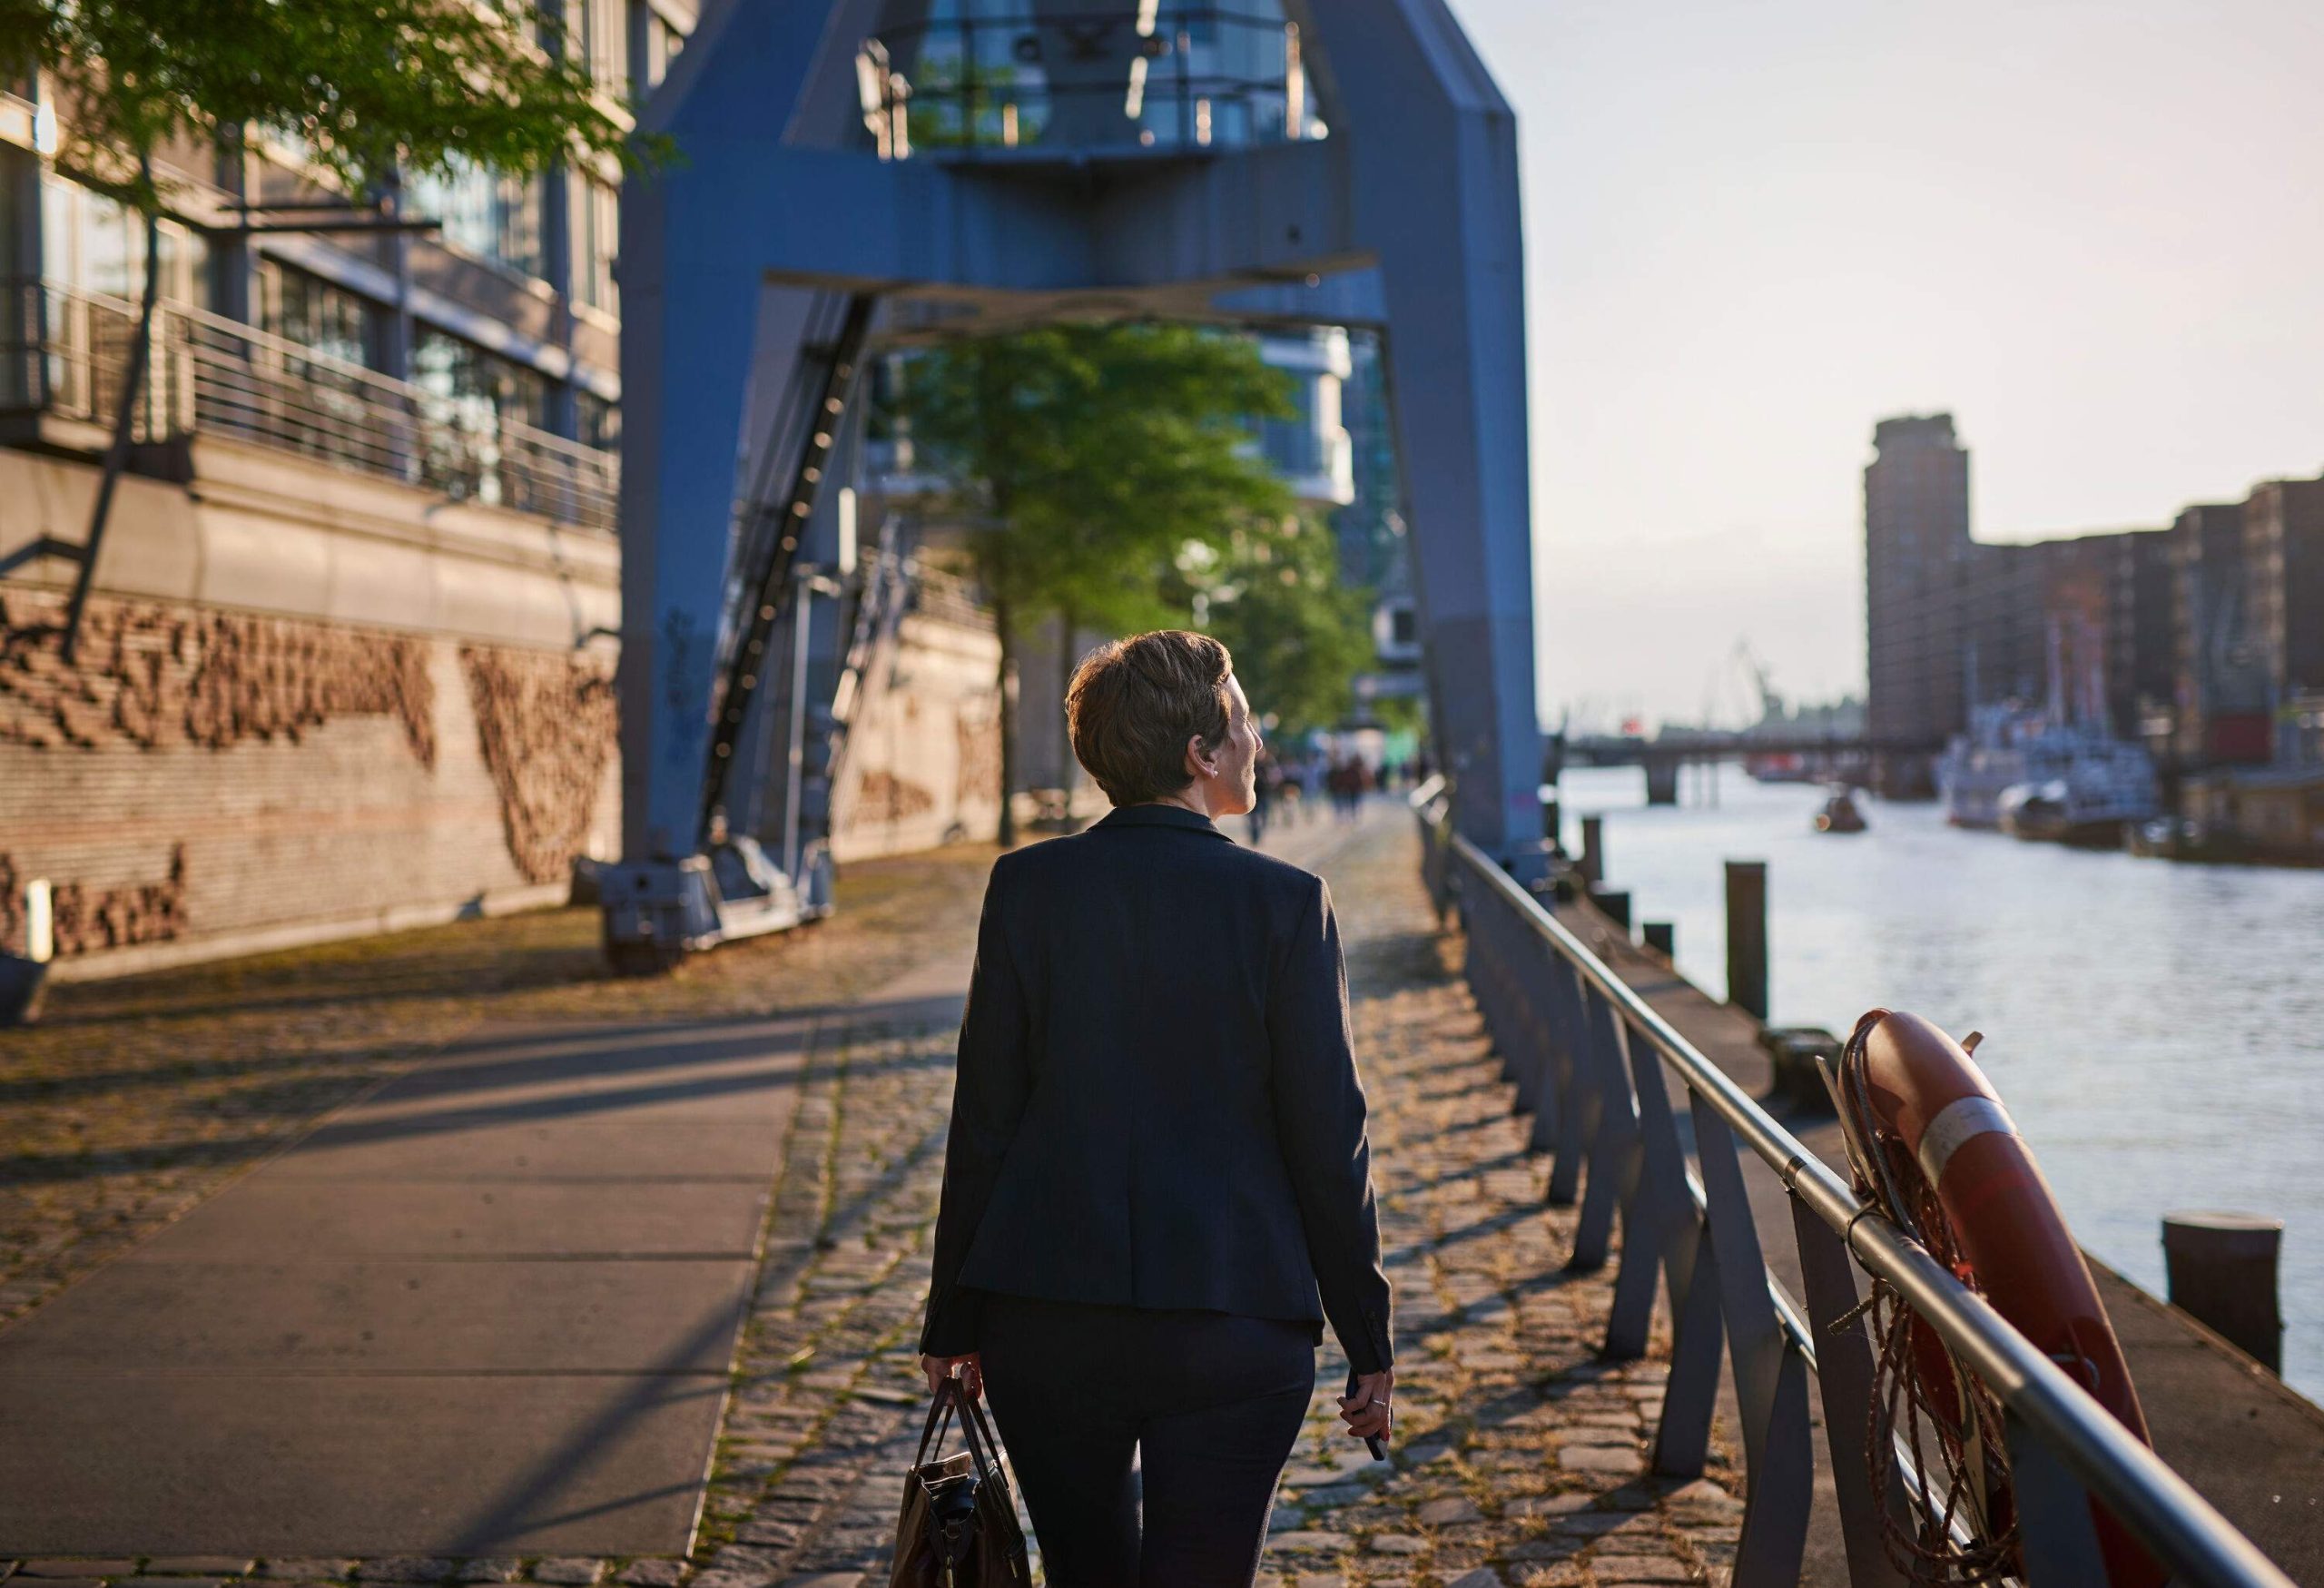 Next to the river's railing, a businesswoman walks while enjoying the sunset light.